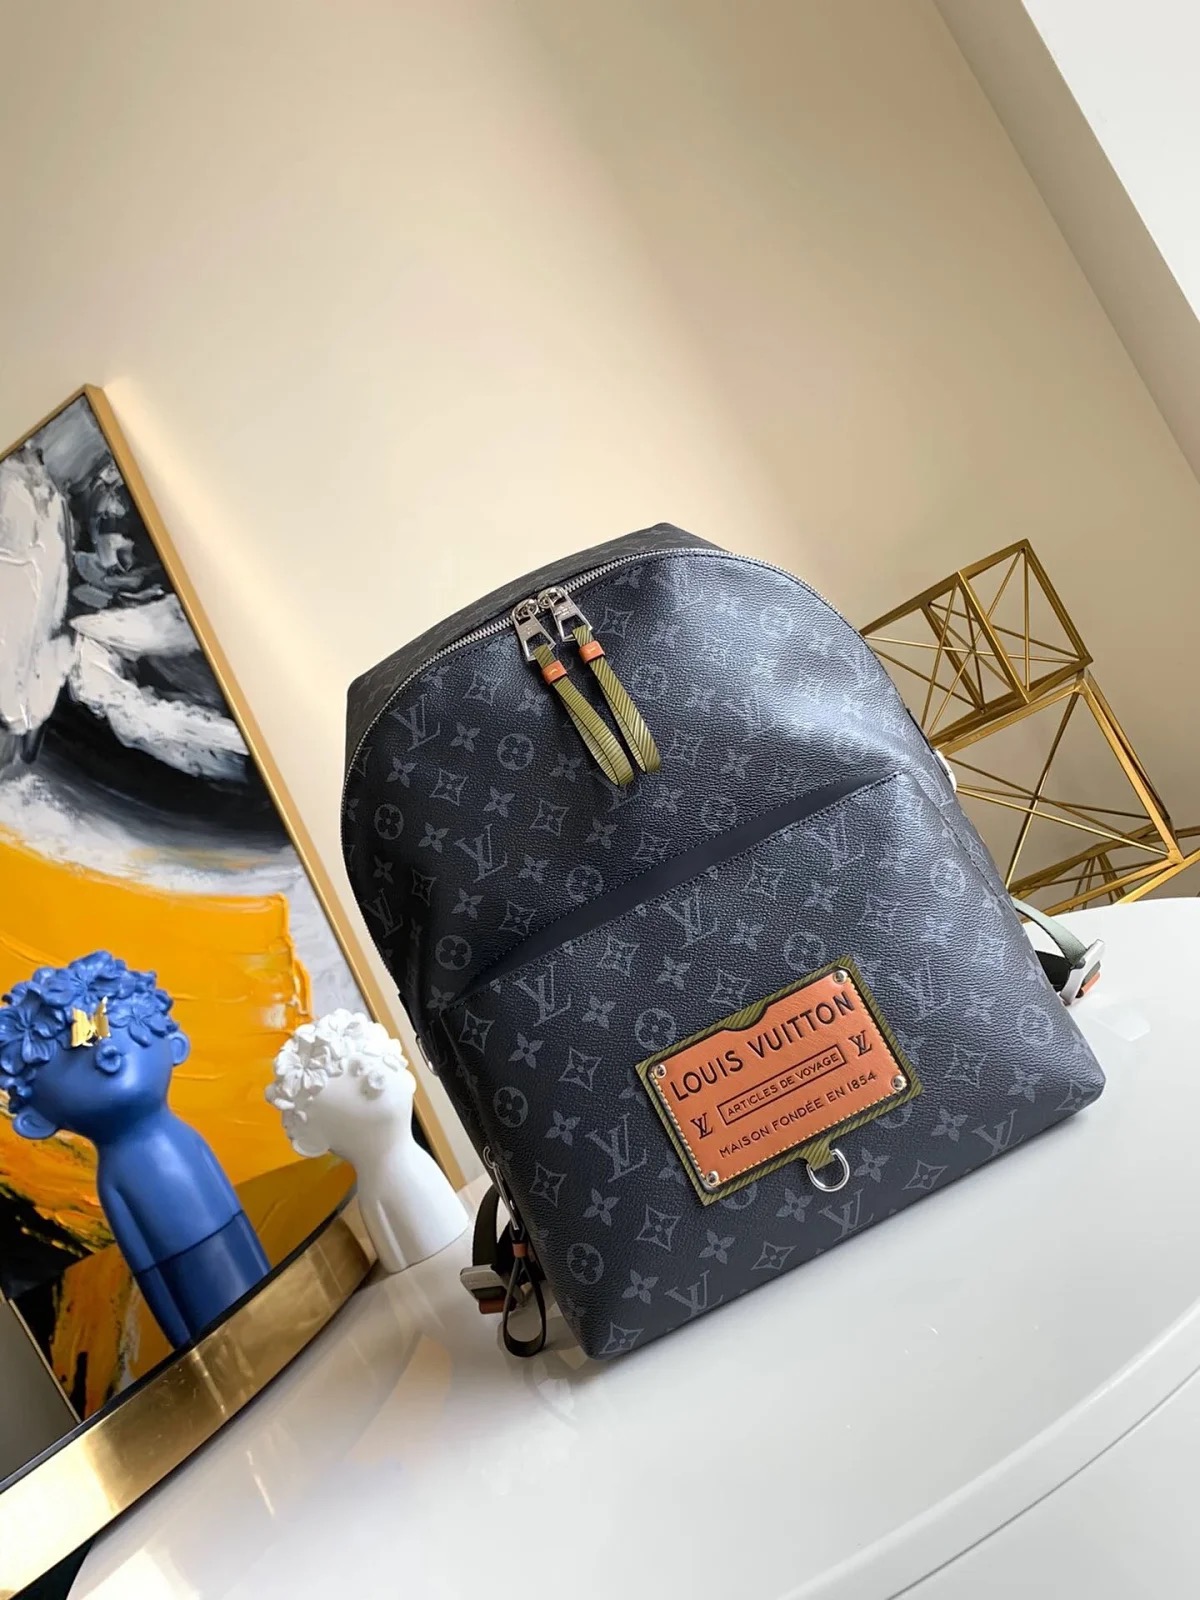 louis vuitton discovery backpack